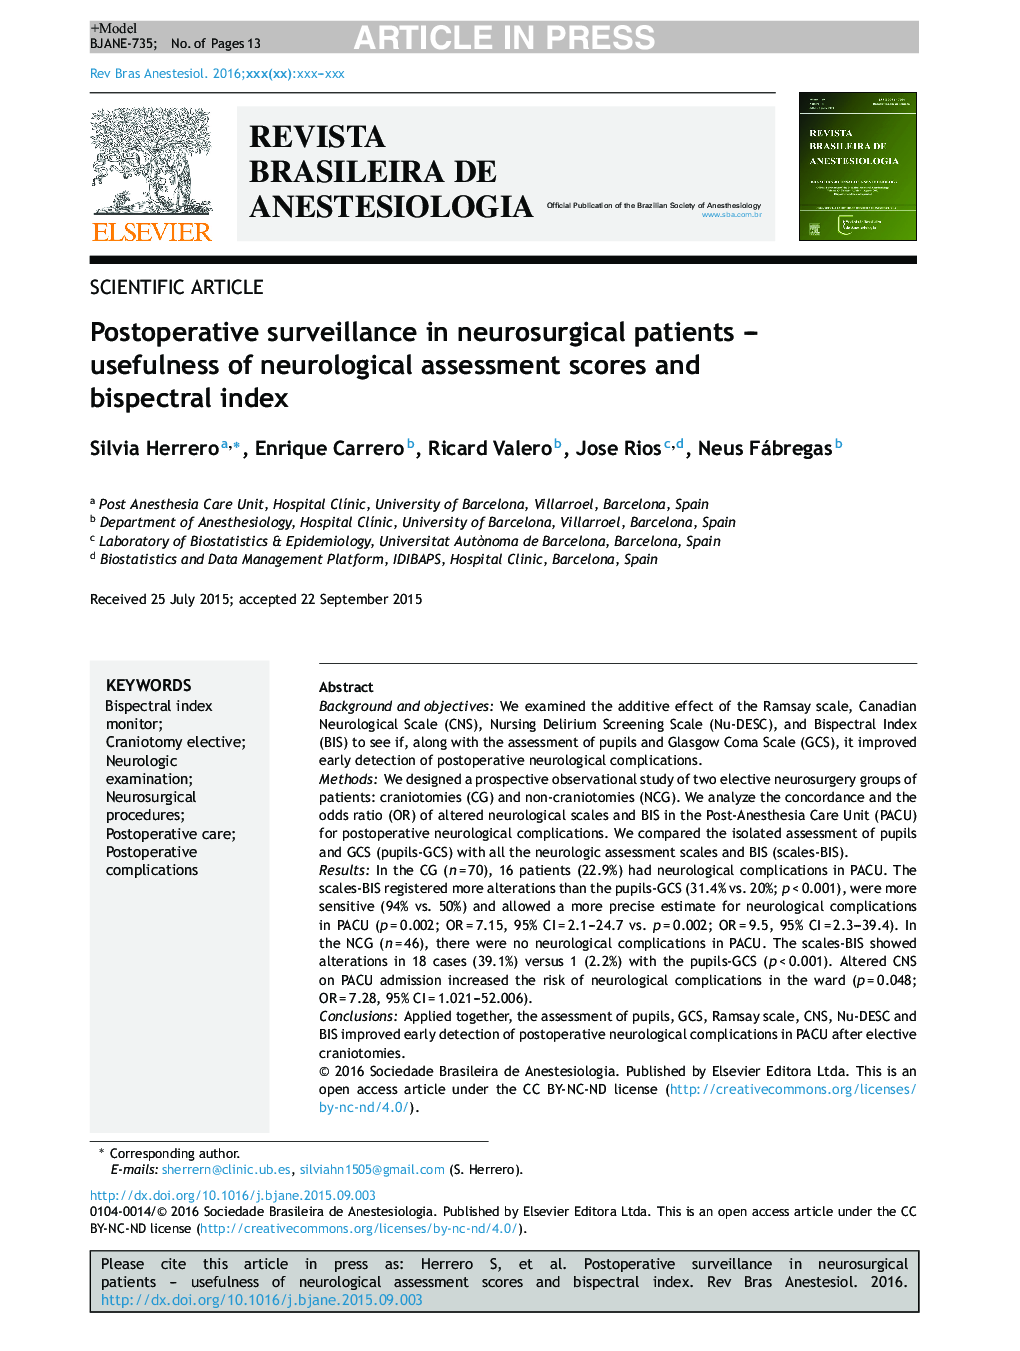 Postoperative surveillance in neurosurgical patients - usefulness of neurological assessment scores and bispectral index